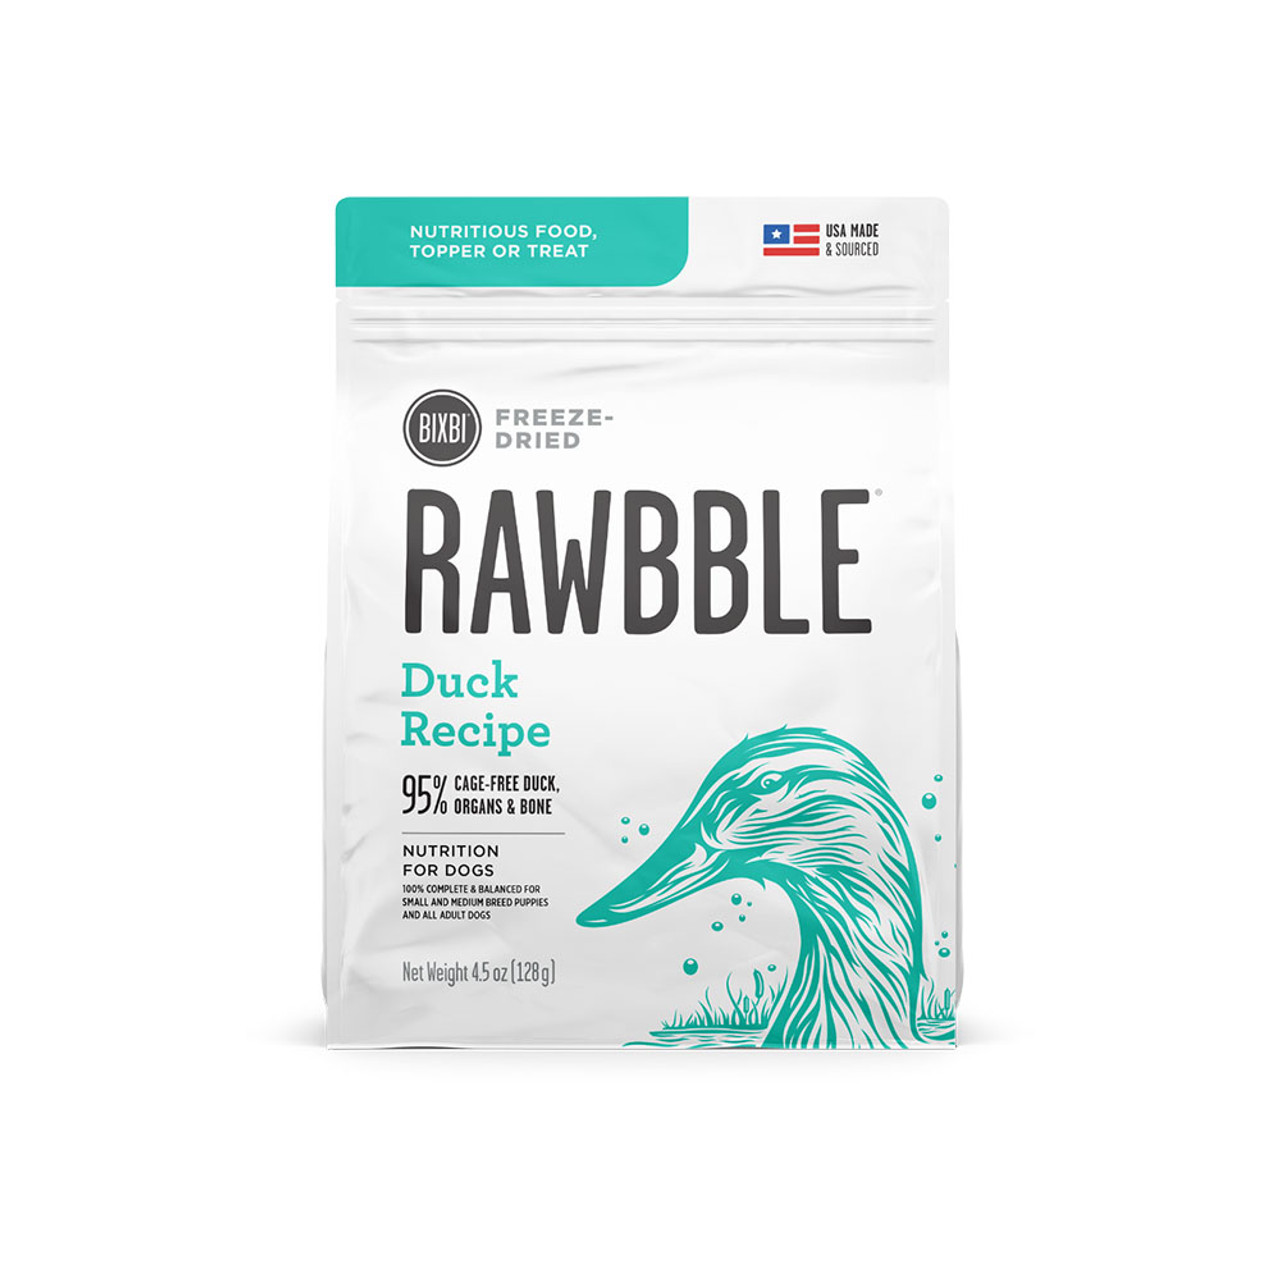 Rawbble Duck Recipe Freeze-Dried Dog Food - Front, 4.5oz